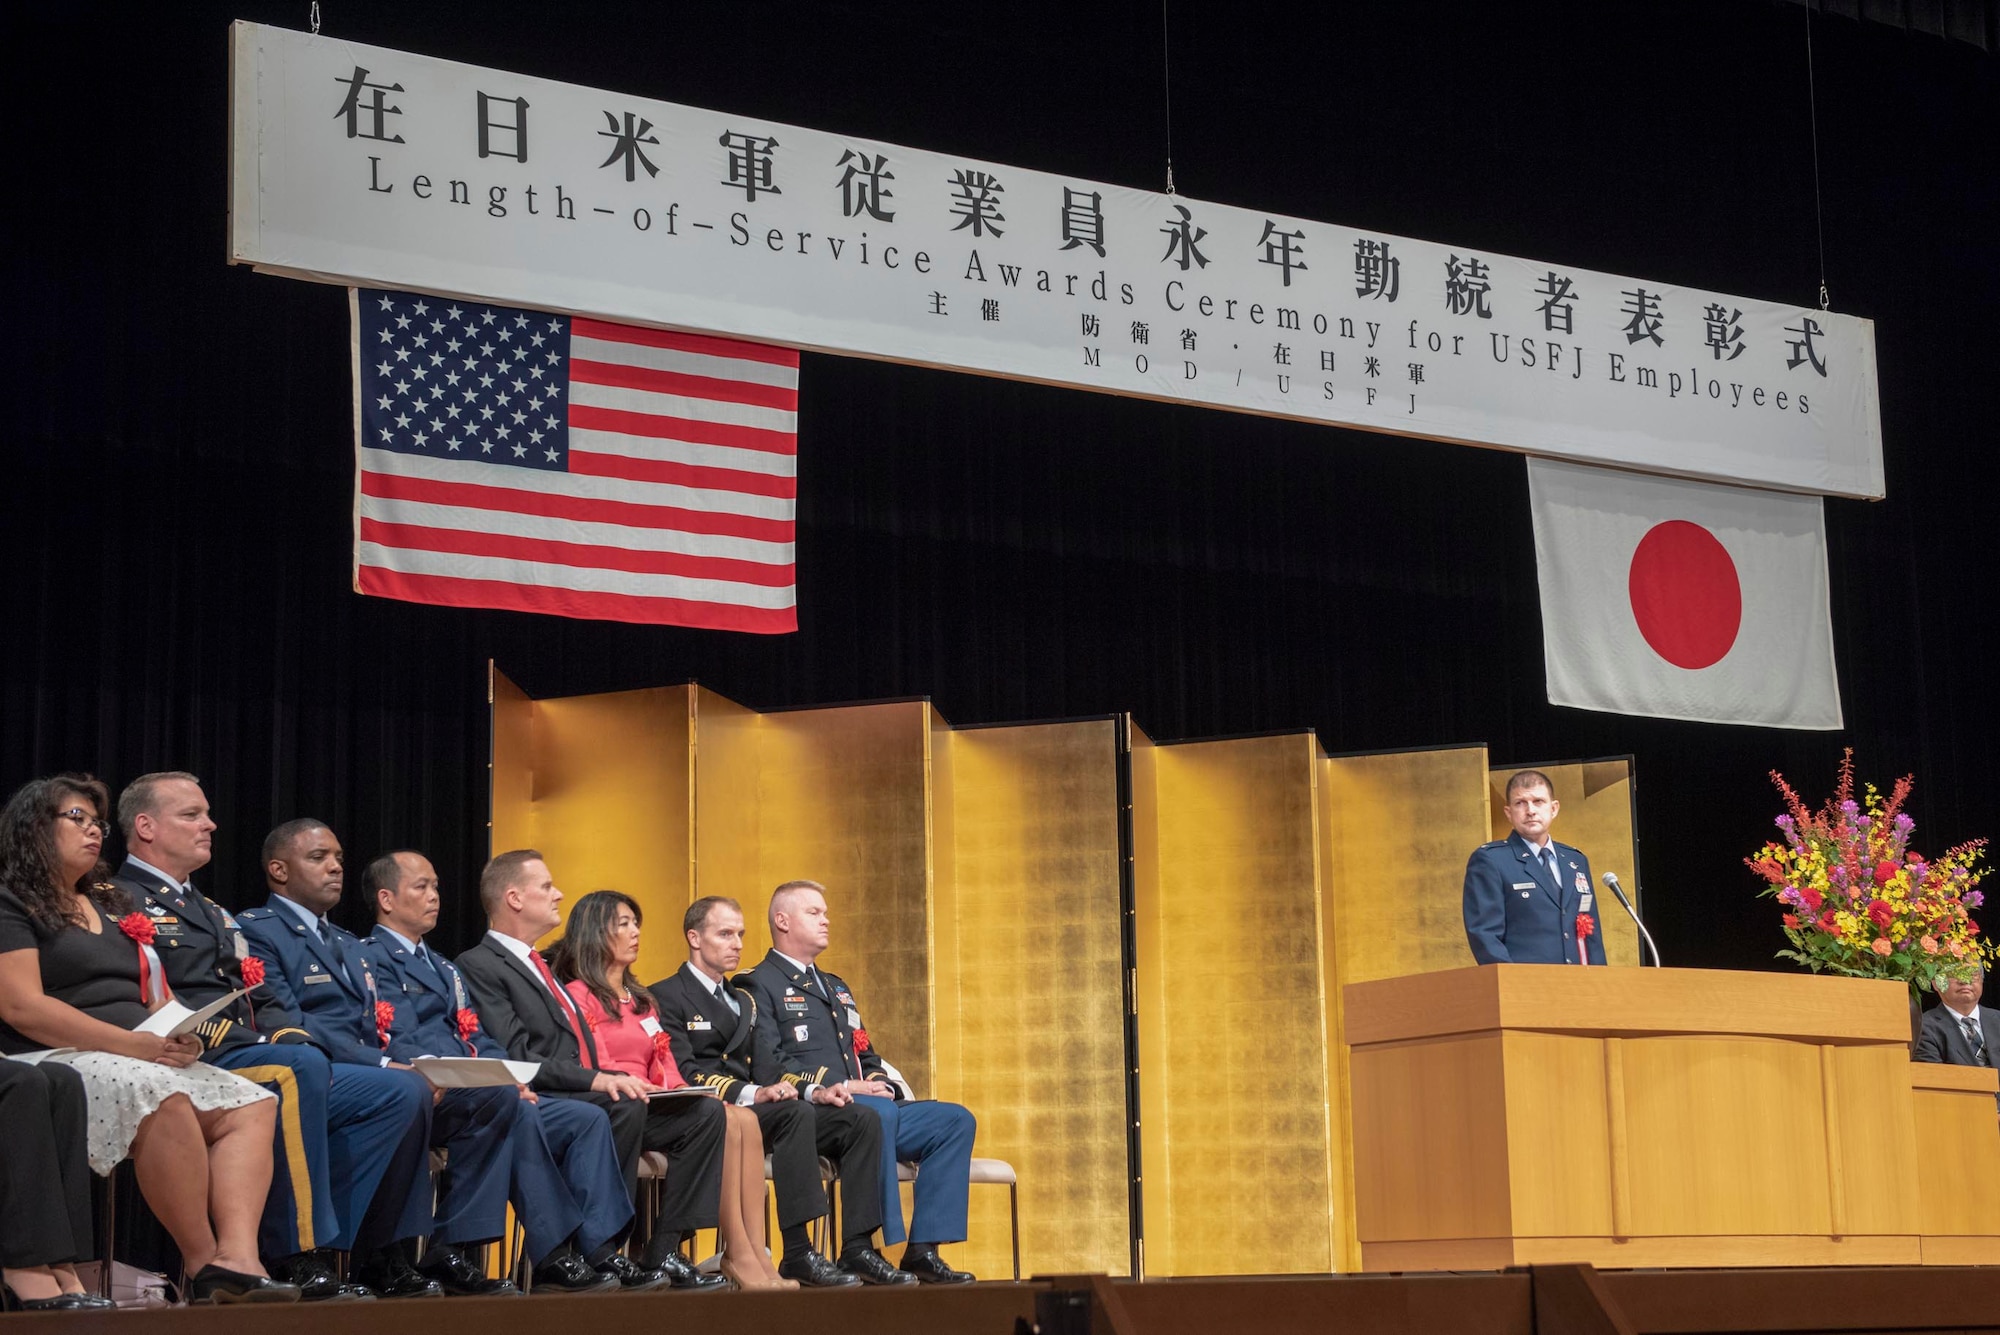 Col. Dominic A. Setka, 5th Air Force chief of staff, pauses for his speech to be translated at the USFJ Length-of-Service Awards Ceremony at the Yutorogi Hall in Hamura City, Japan, Oct. 10, 2018.